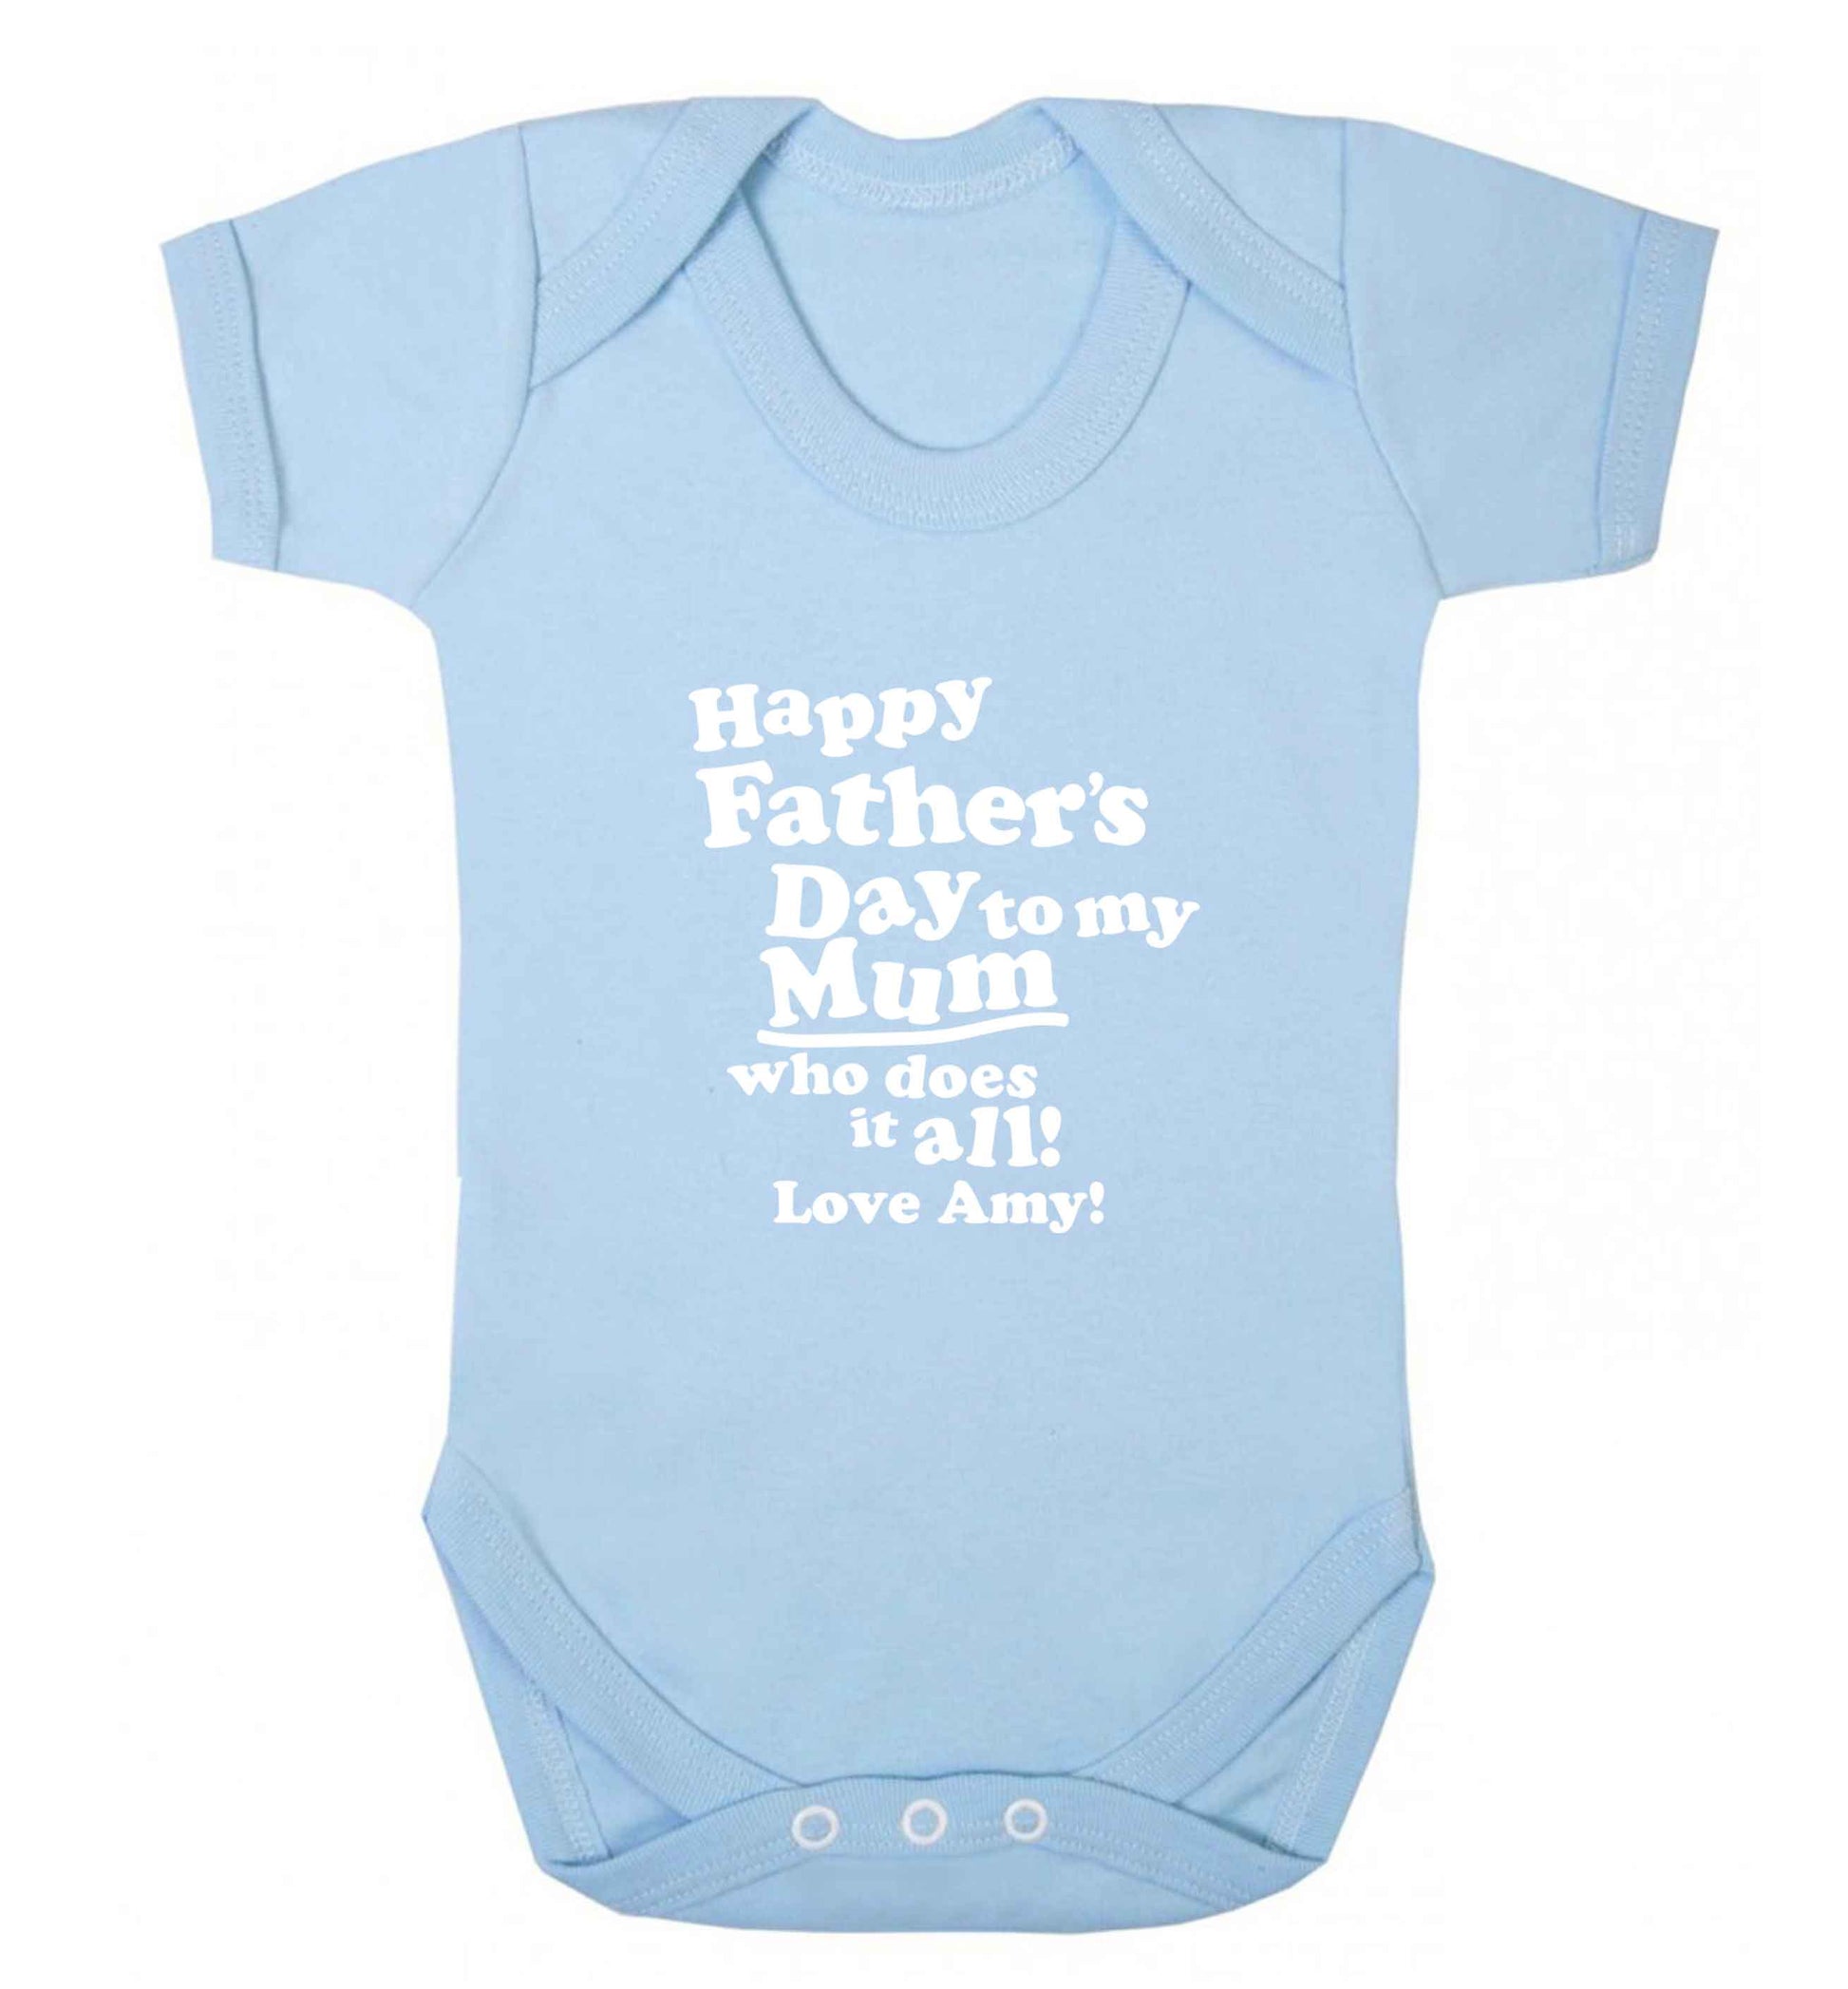 Happy Father's day to my mum who does it all baby vest pale blue 18-24 months